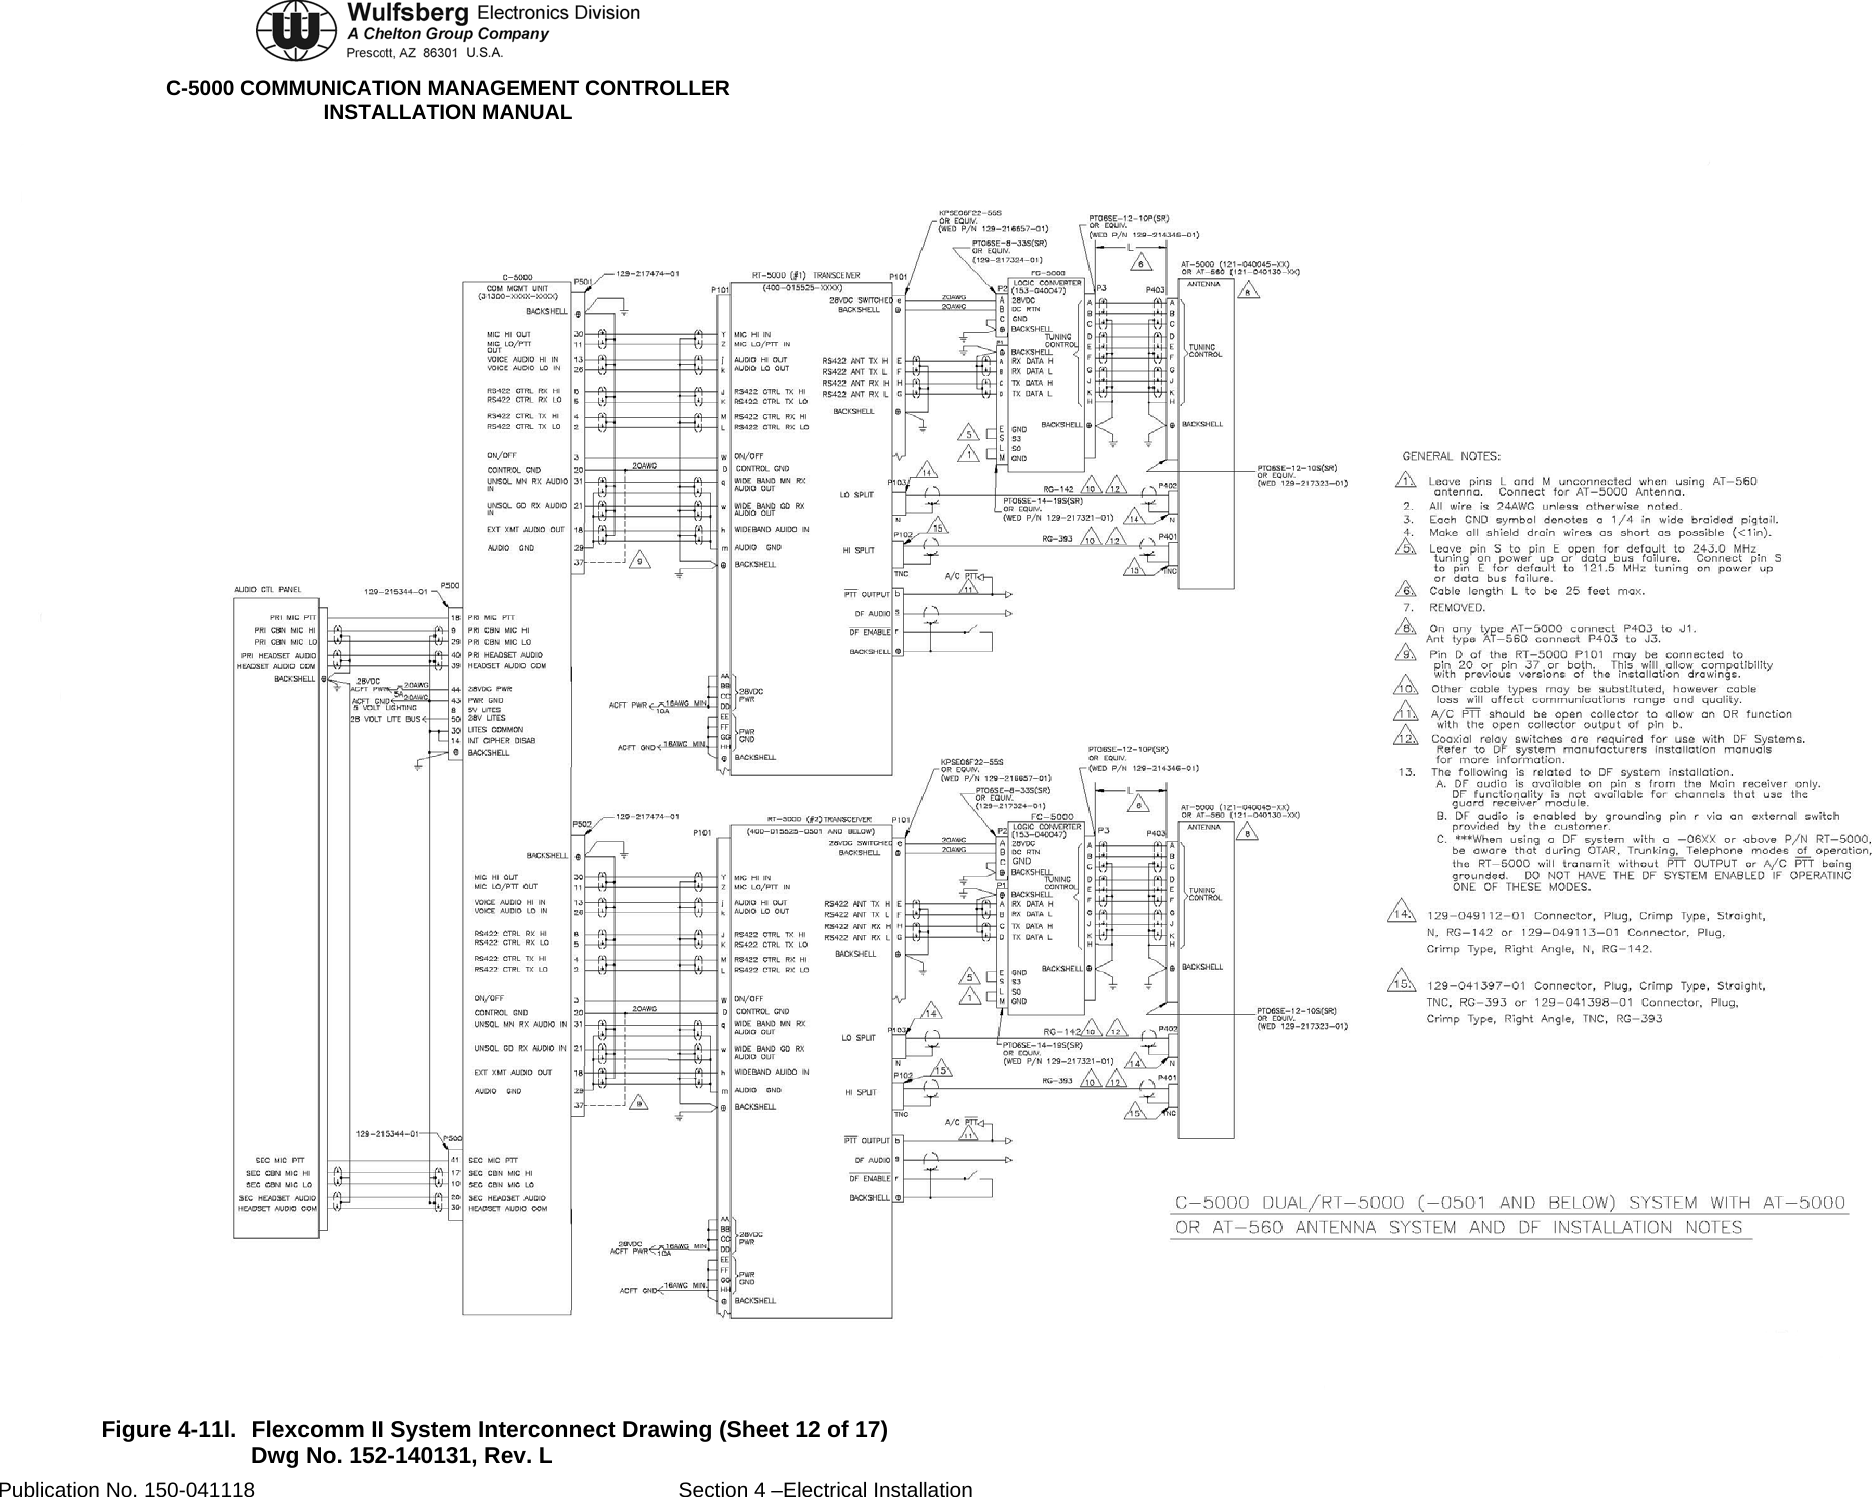  C-5000 COMMUNICATION MANAGEMENT CONTROLLER INSTALLATION MANUAL  Figure 4-11l.  Flexcomm II System Interconnect Drawing (Sheet 12 of 17) Dwg No. 152-140131, Rev. L Publication No. 150-041118  Section 4 –Electrical Installation 